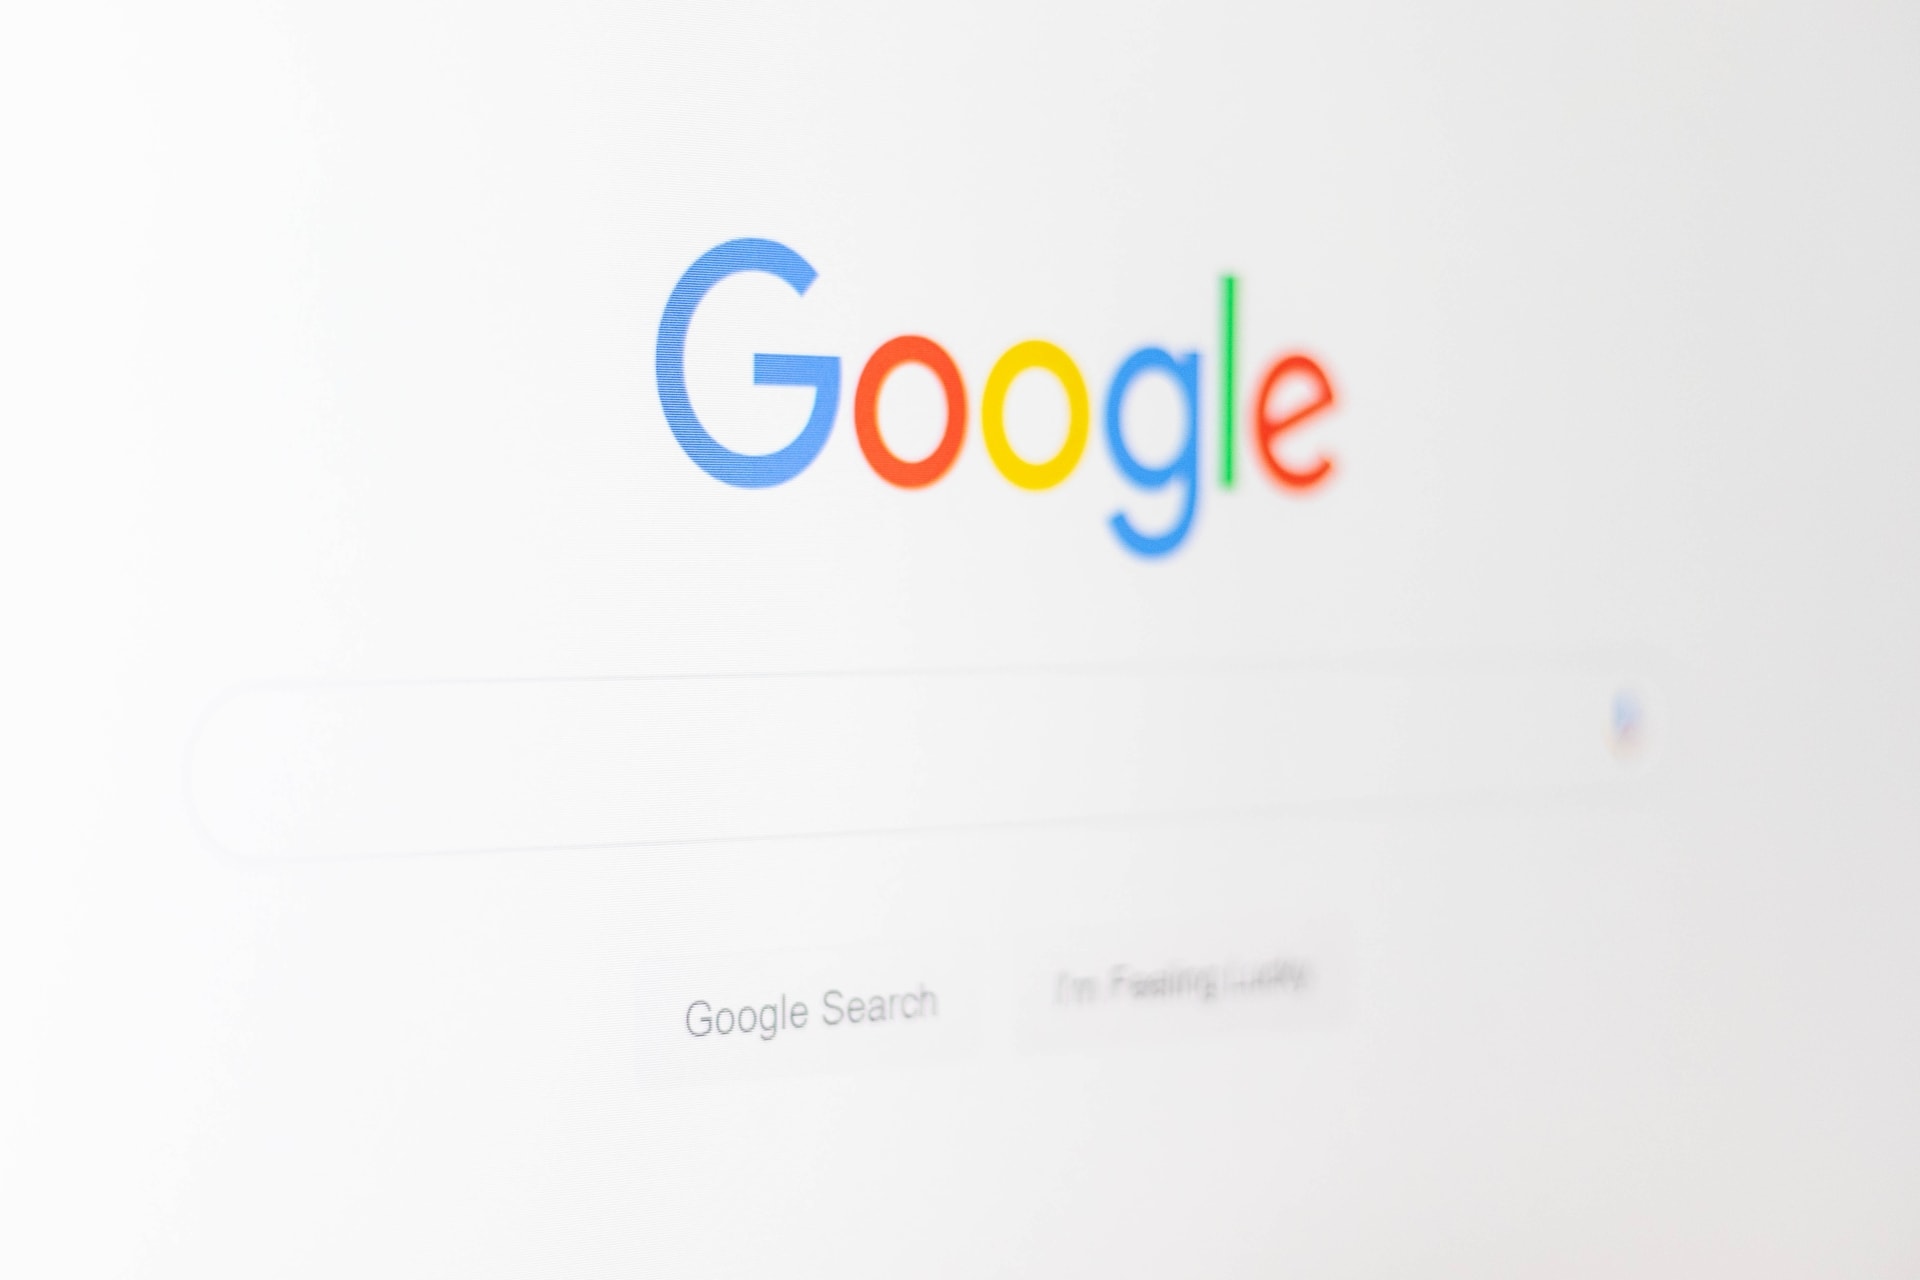 Google logo with search field